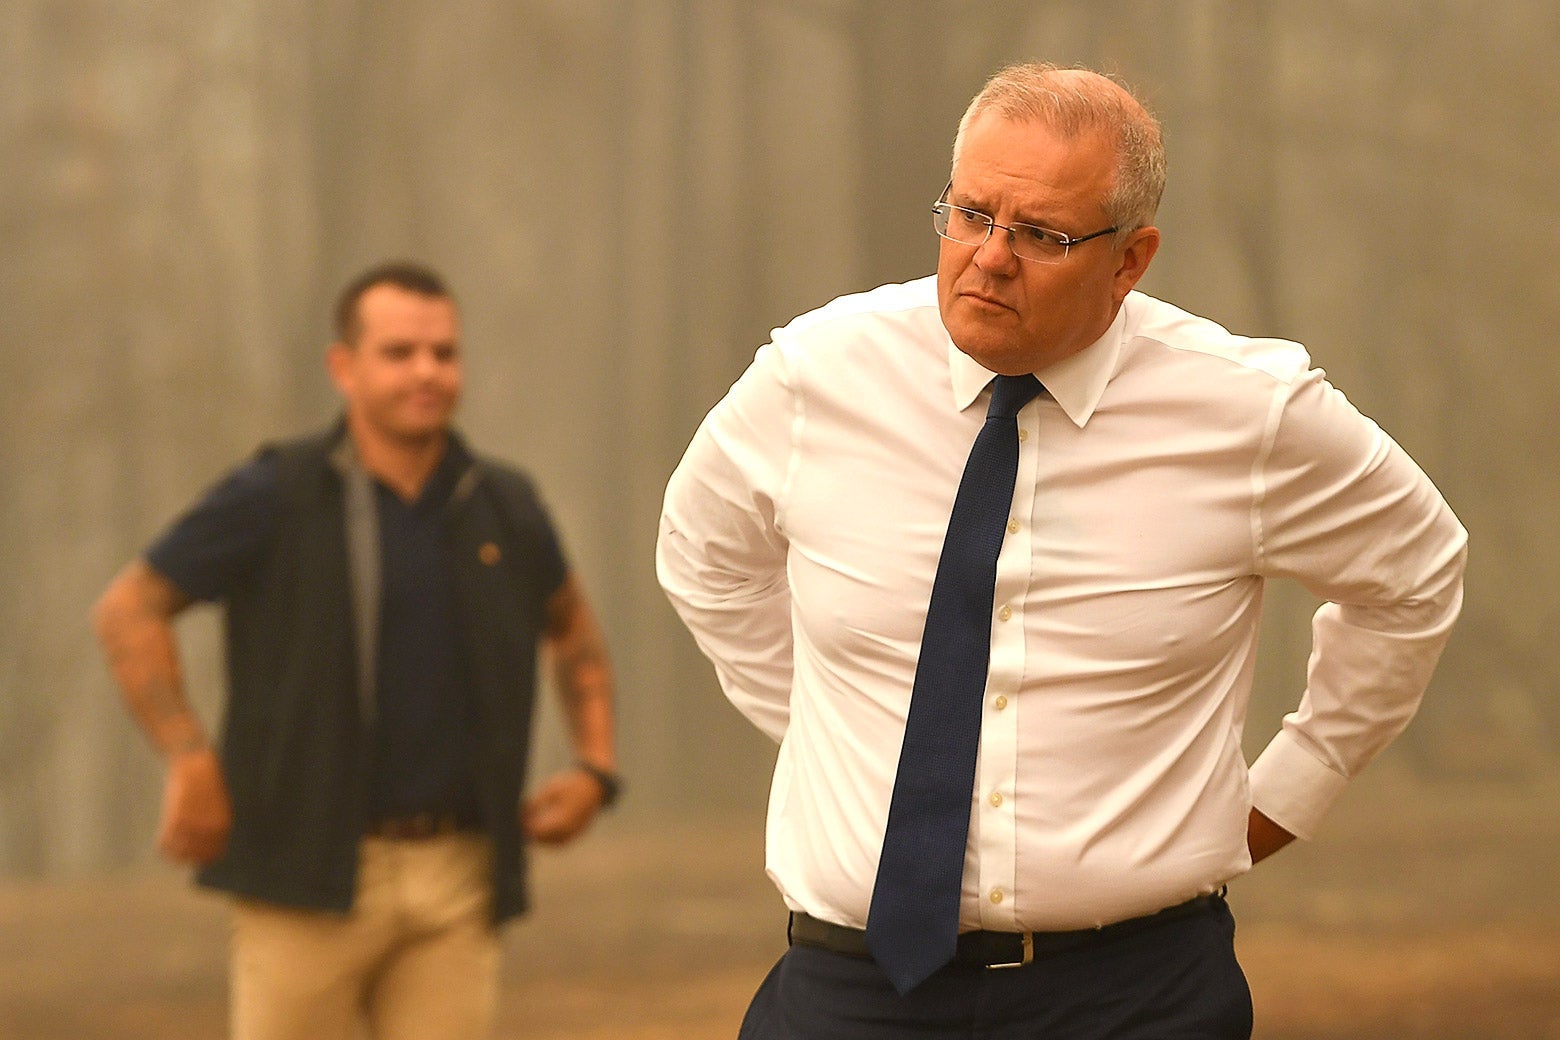 Scott Morrison, in shirt sleeves, with his hands behind his back.